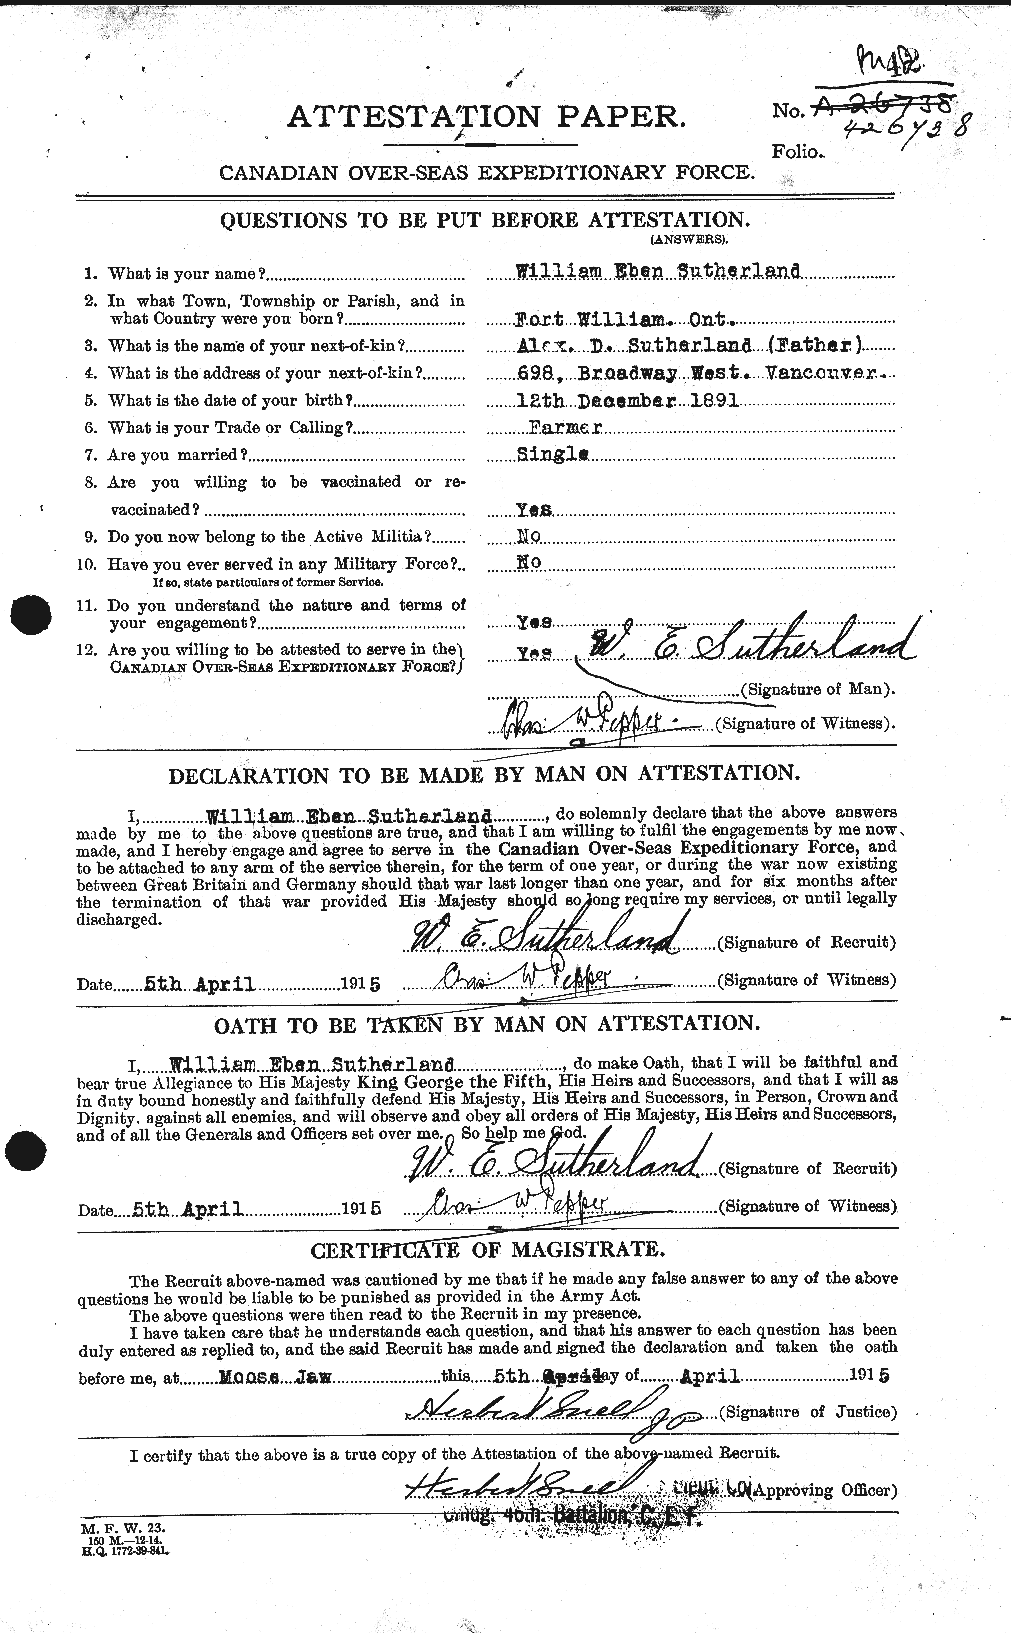 Personnel Records of the First World War - CEF 126437a